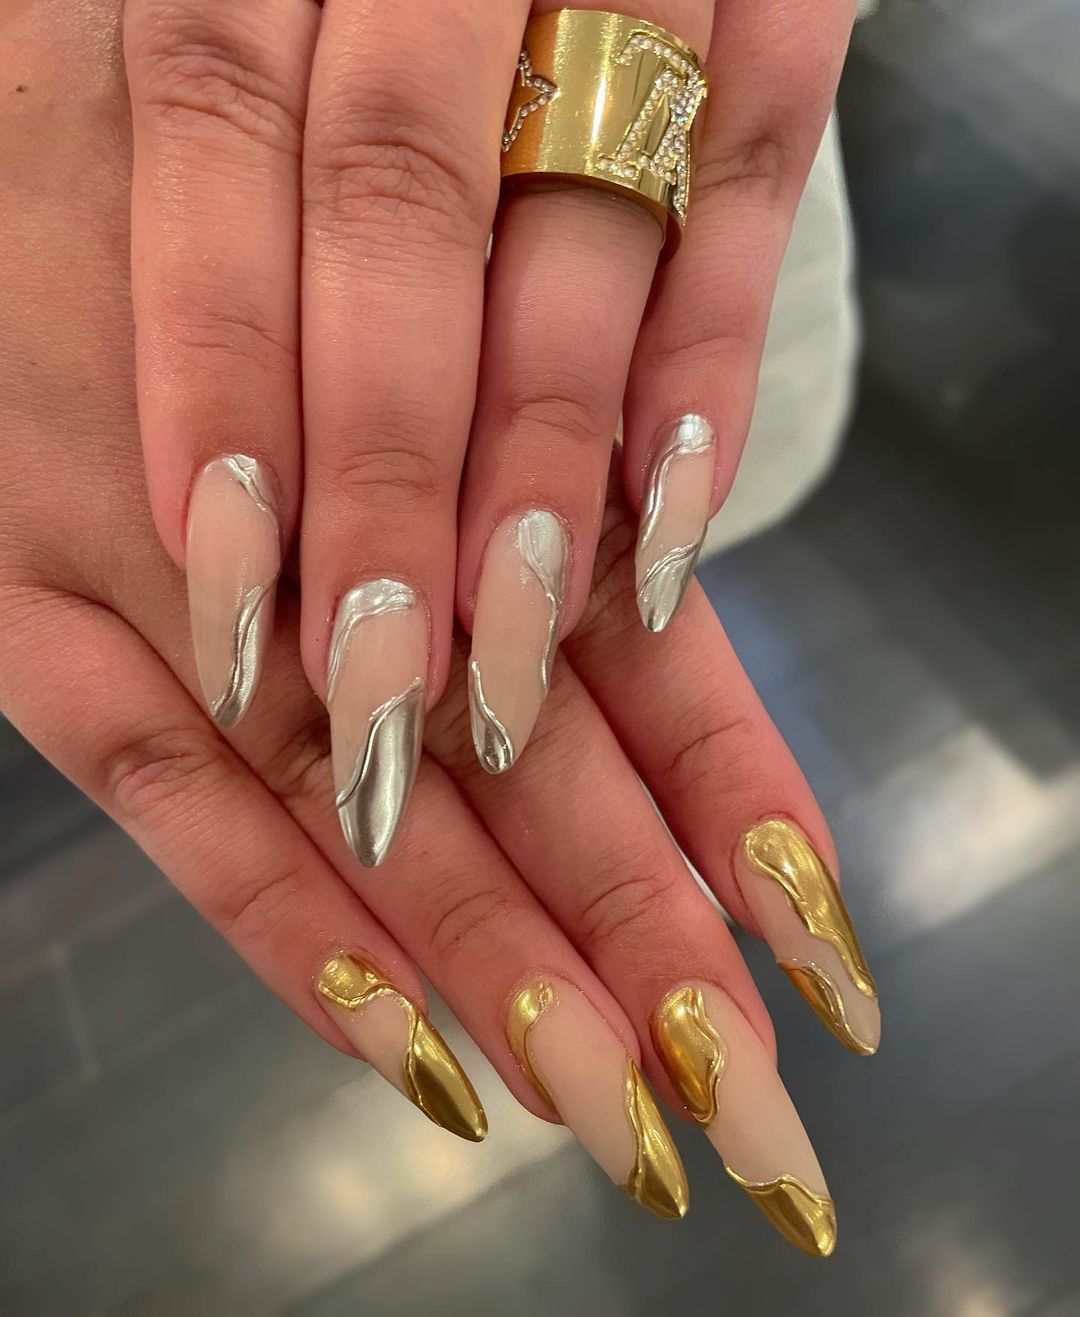 All That Glitters: 37 Gold Nails Designs To Try, 54% OFF